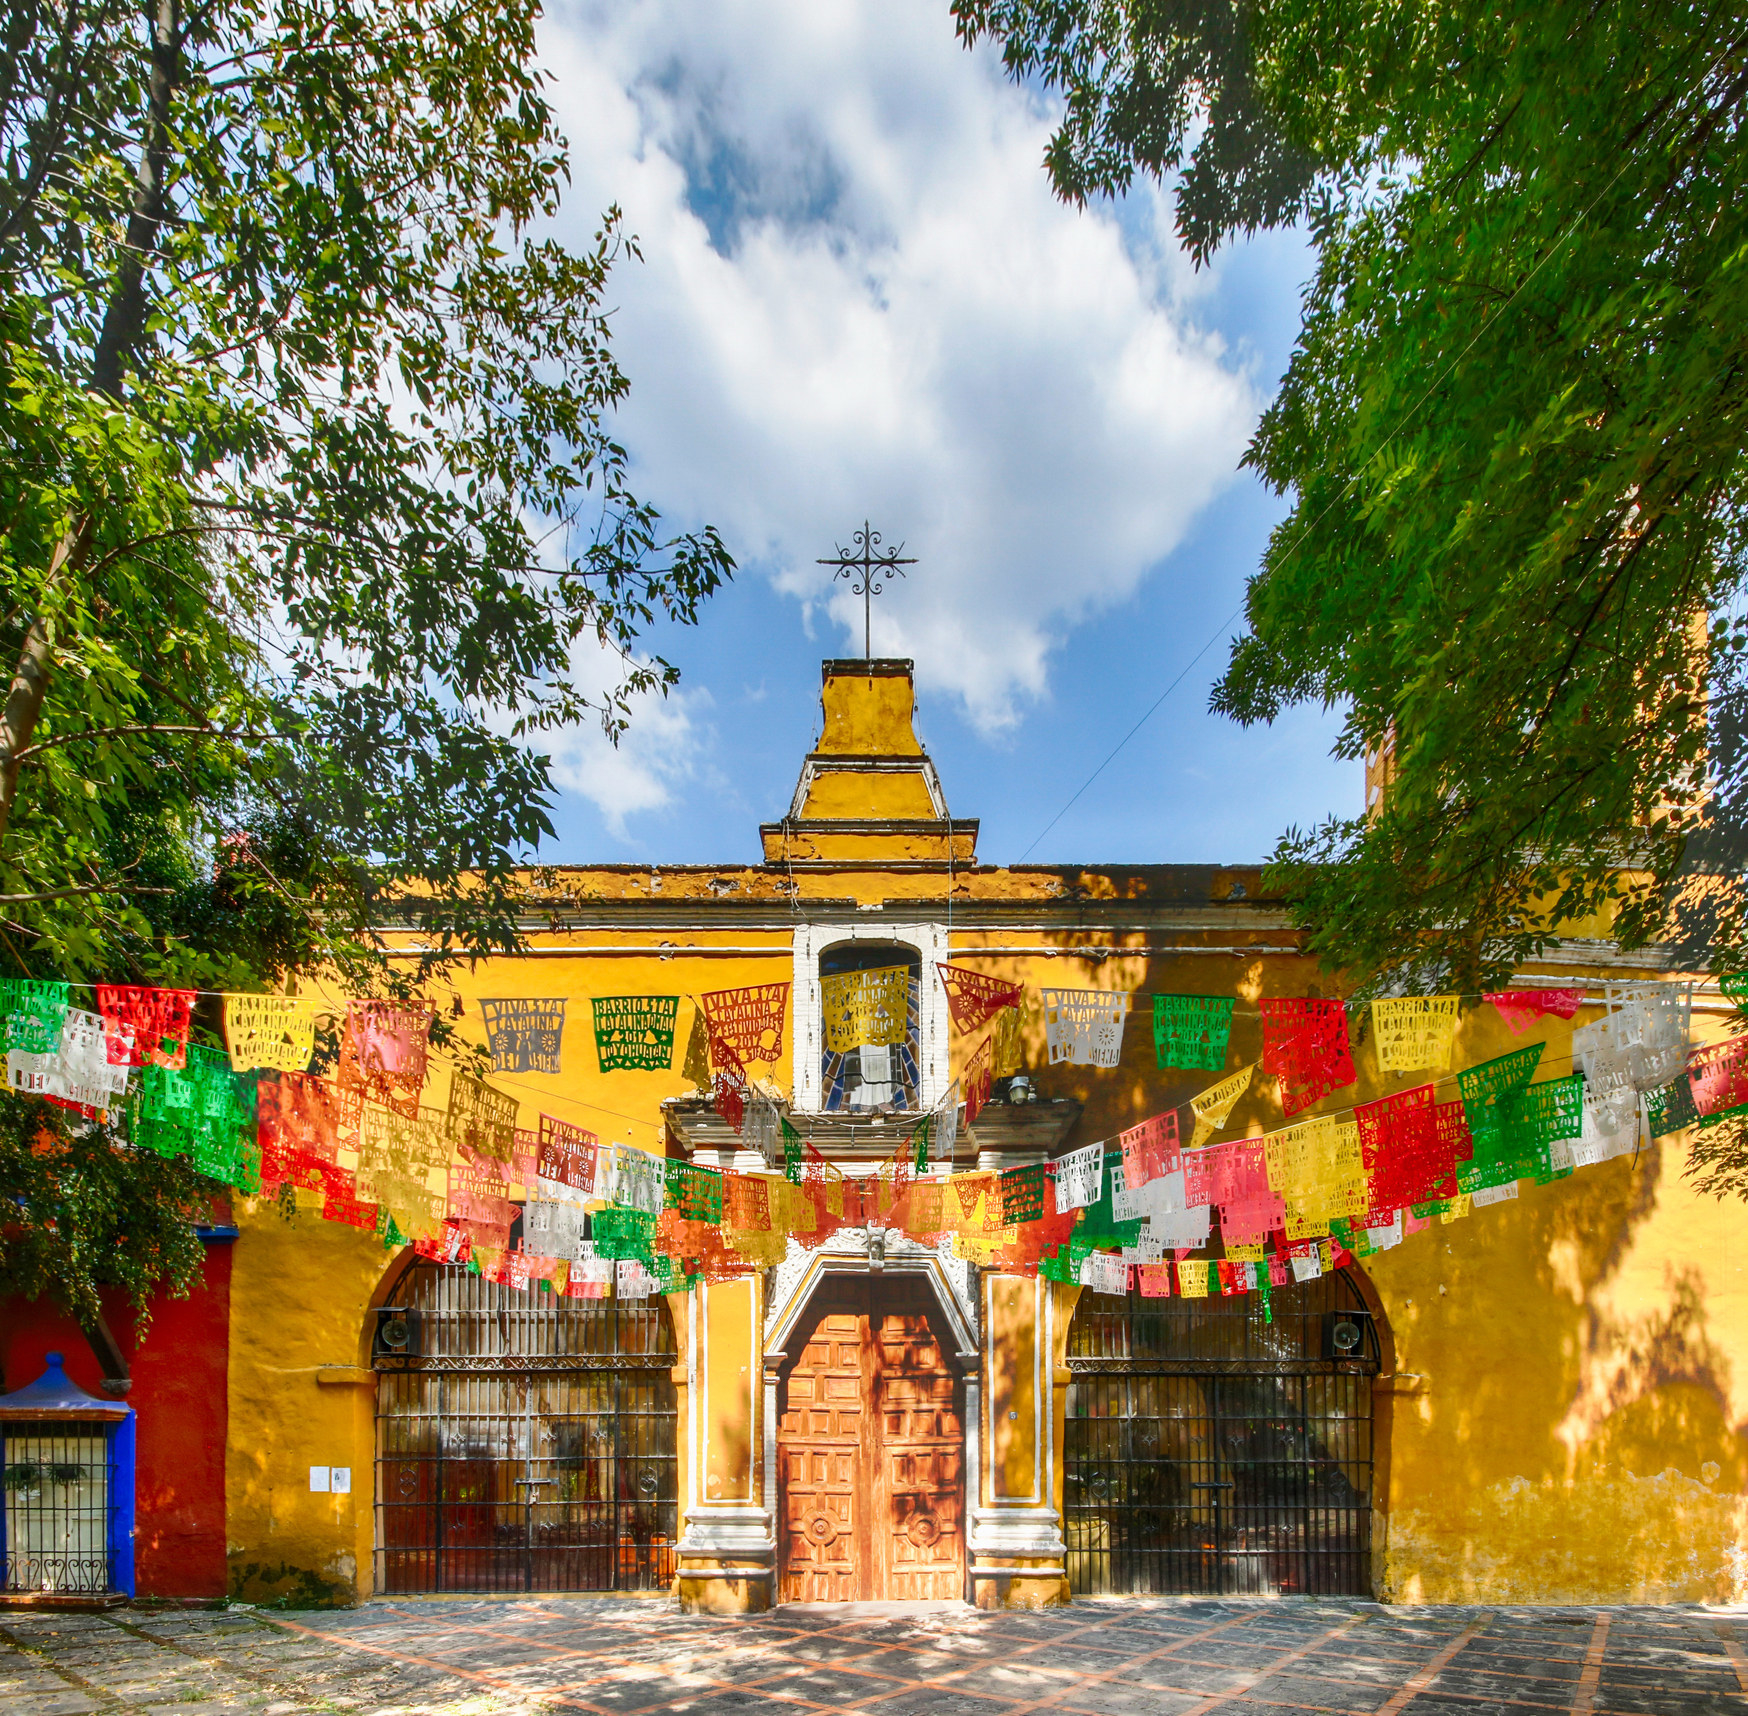 A colorful church in Mexico City.